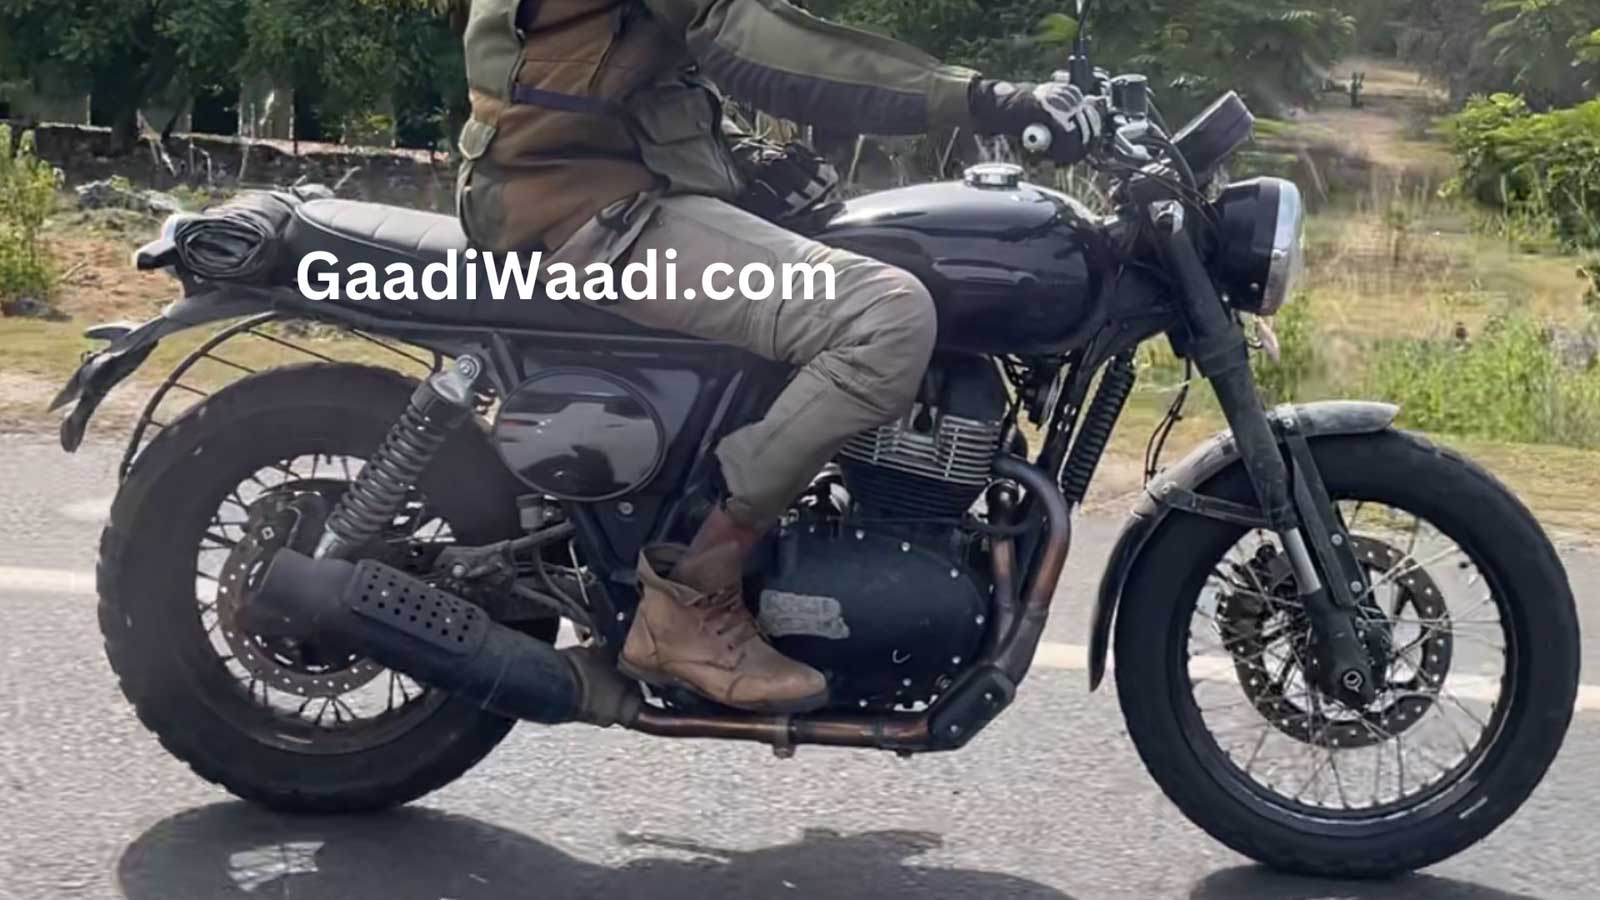 Upcoming Royal Enfield Bikes You Should Know: Bobber To Scram